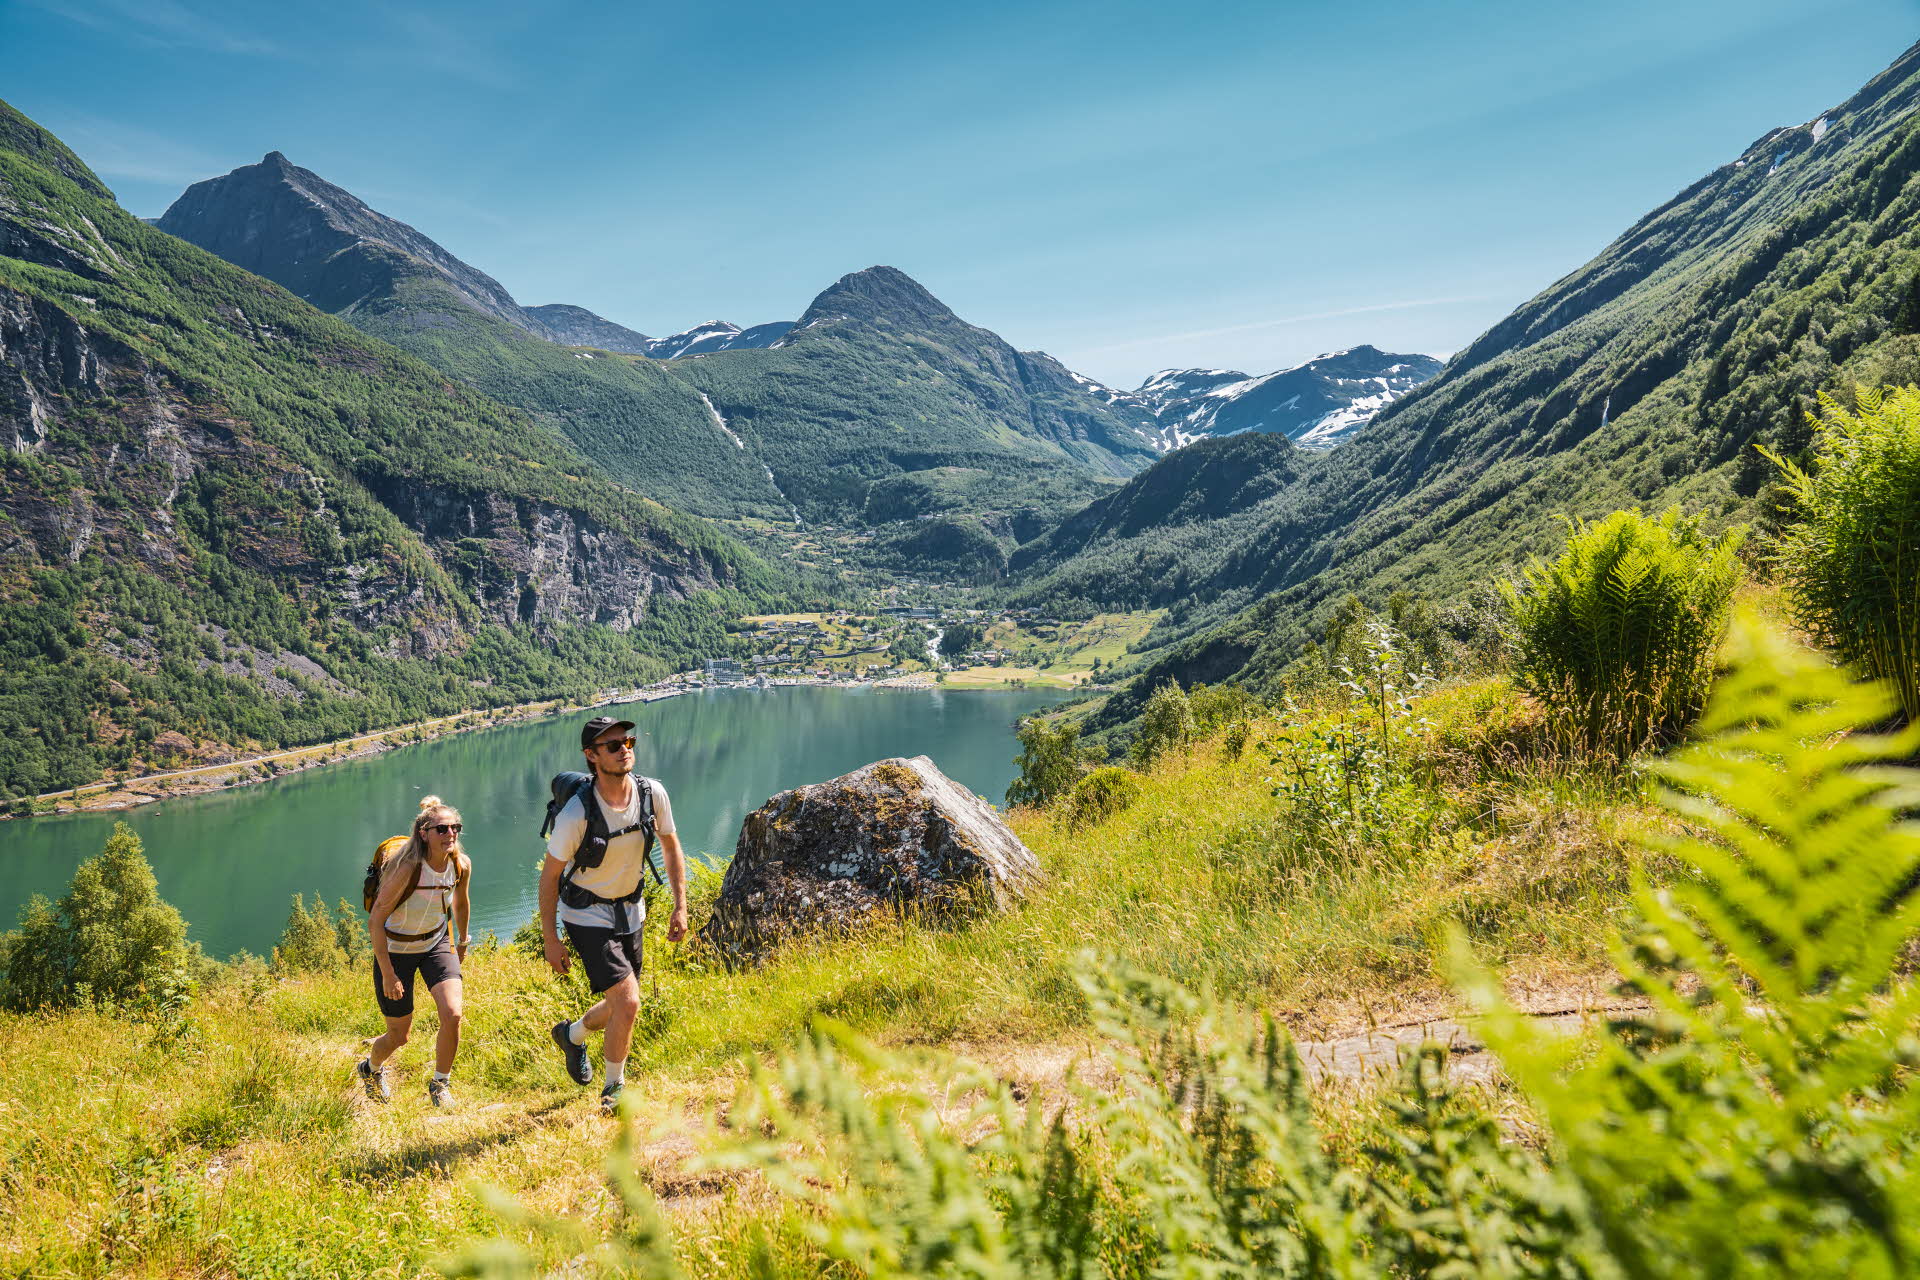 A woman and a man hiking above the Geirangerfjord with Geiranger and the mountains in the background